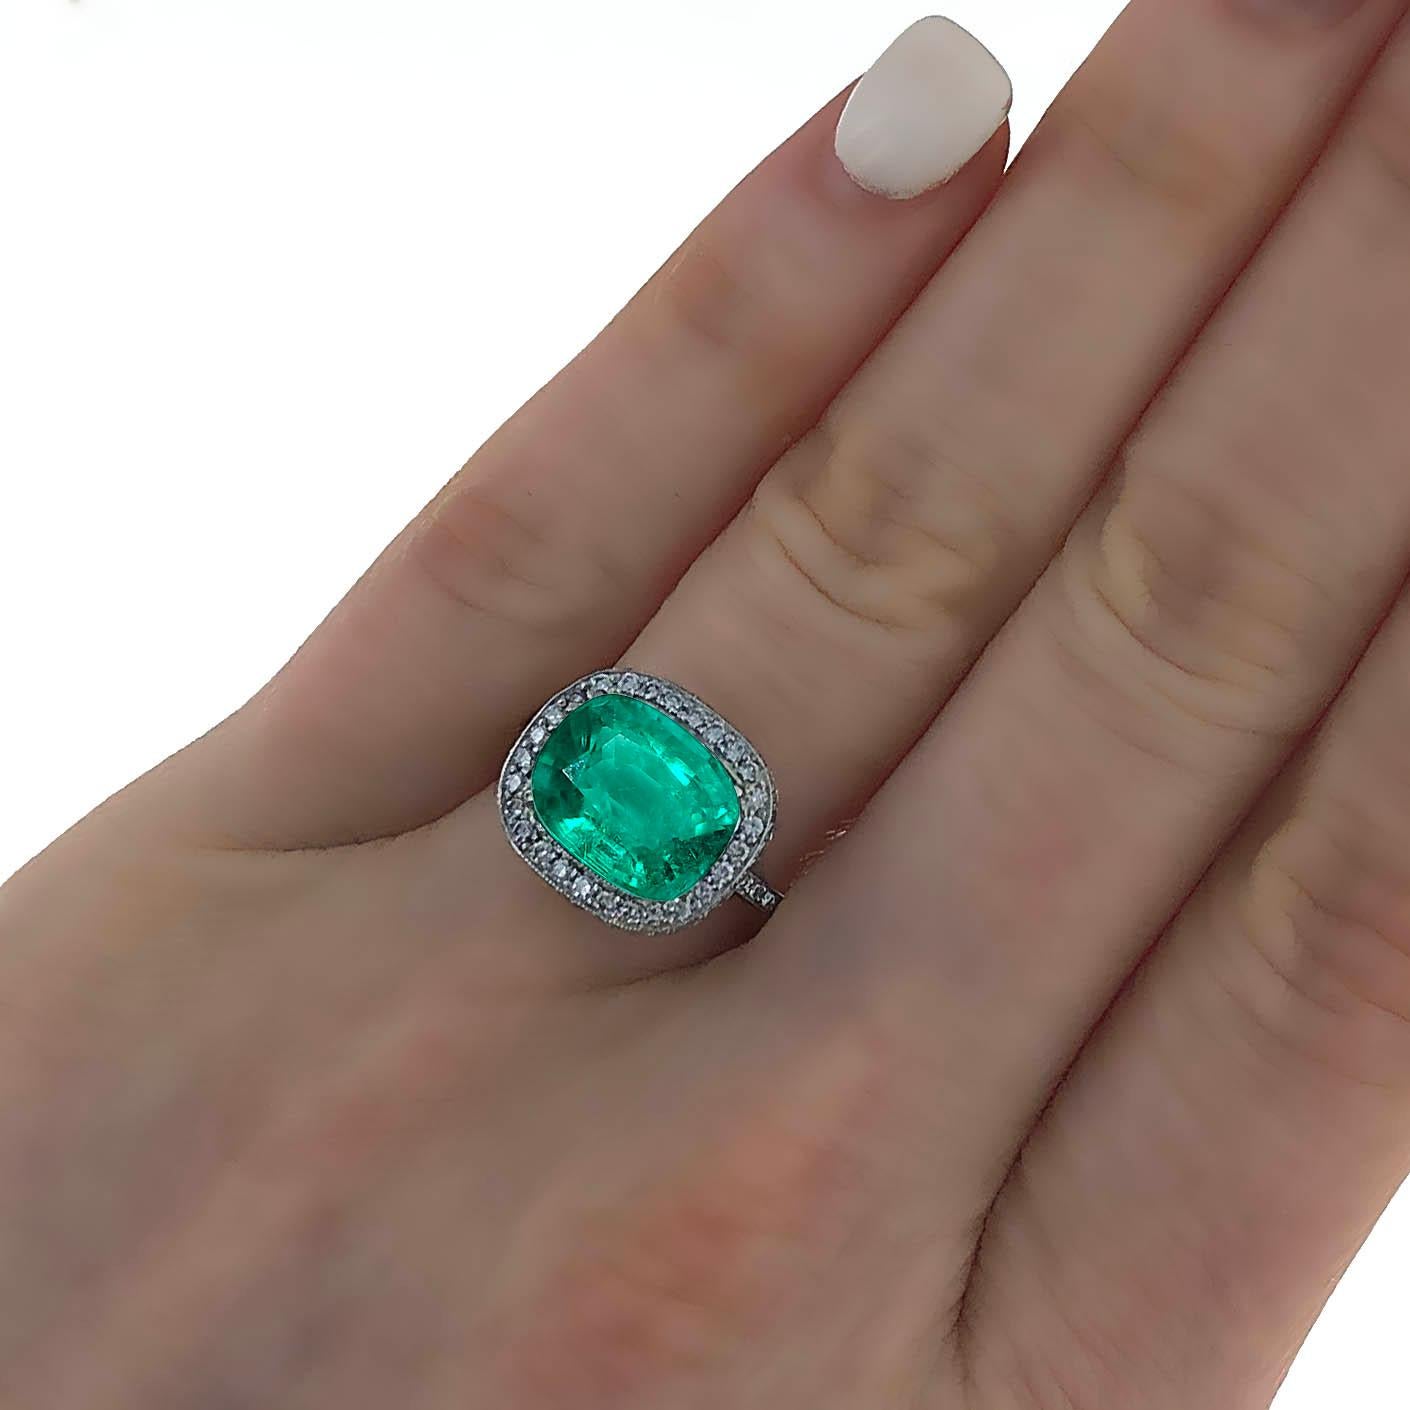 AGL and GUILD Certified 3.75 carat natural emerald and diamond cocktail  ring. The center stone is certified by the American Gemological Laboratories, AGL, and GUILD Laboratory. The certificates state that the stone is a natural Emerald. It is a